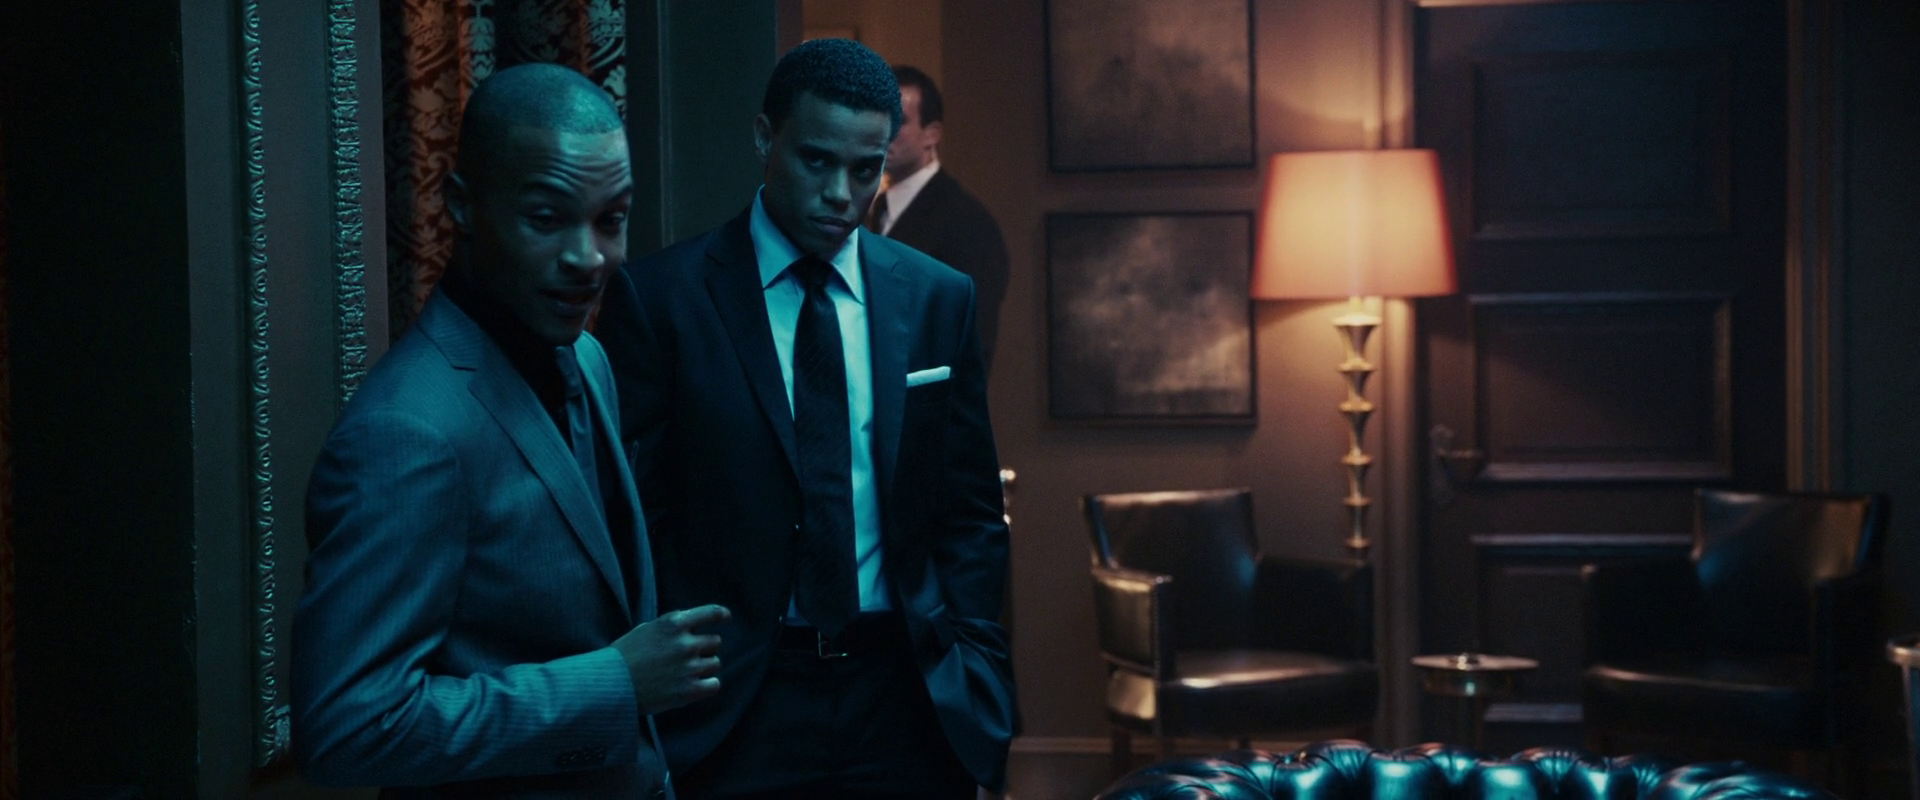 з˰ Takers.2010.1080p.BluRay.x264.DTS-FGT 7.94GB-6.png